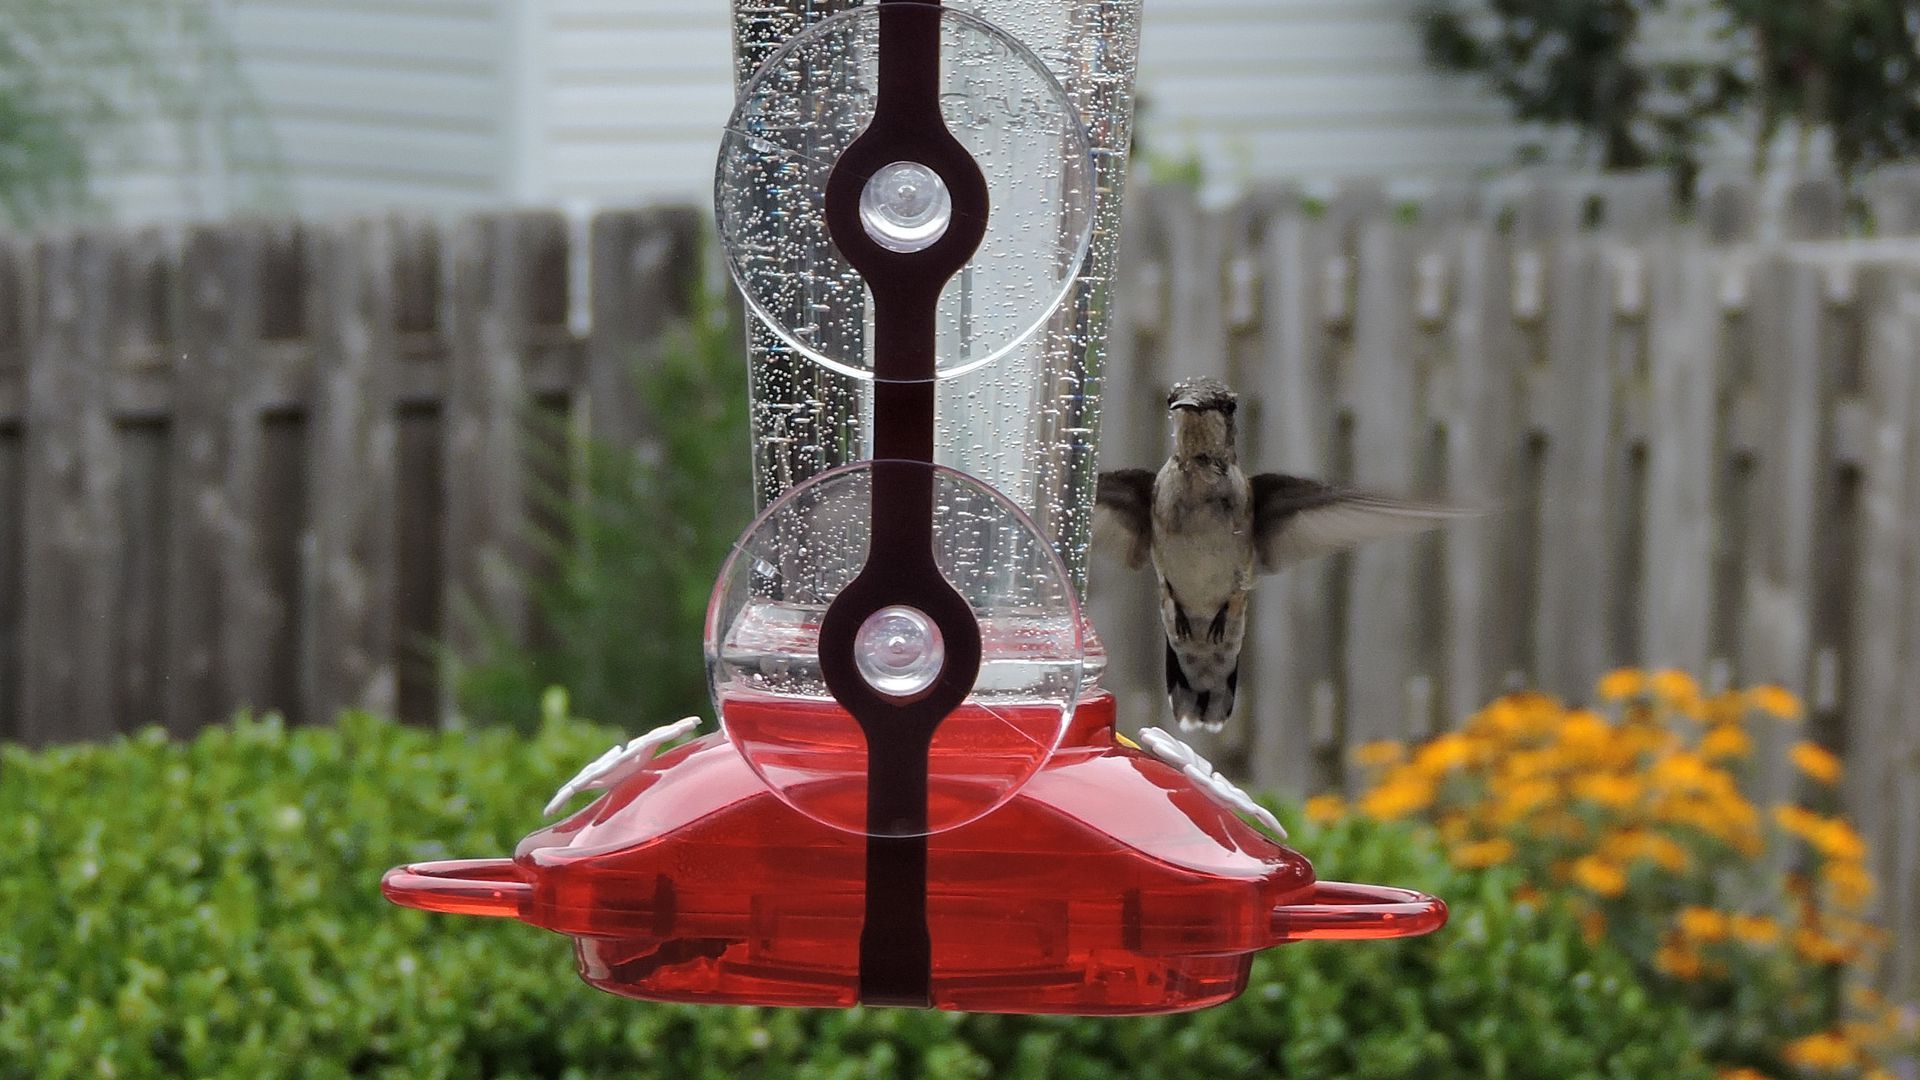 A hummingbird hovers over a window feeder